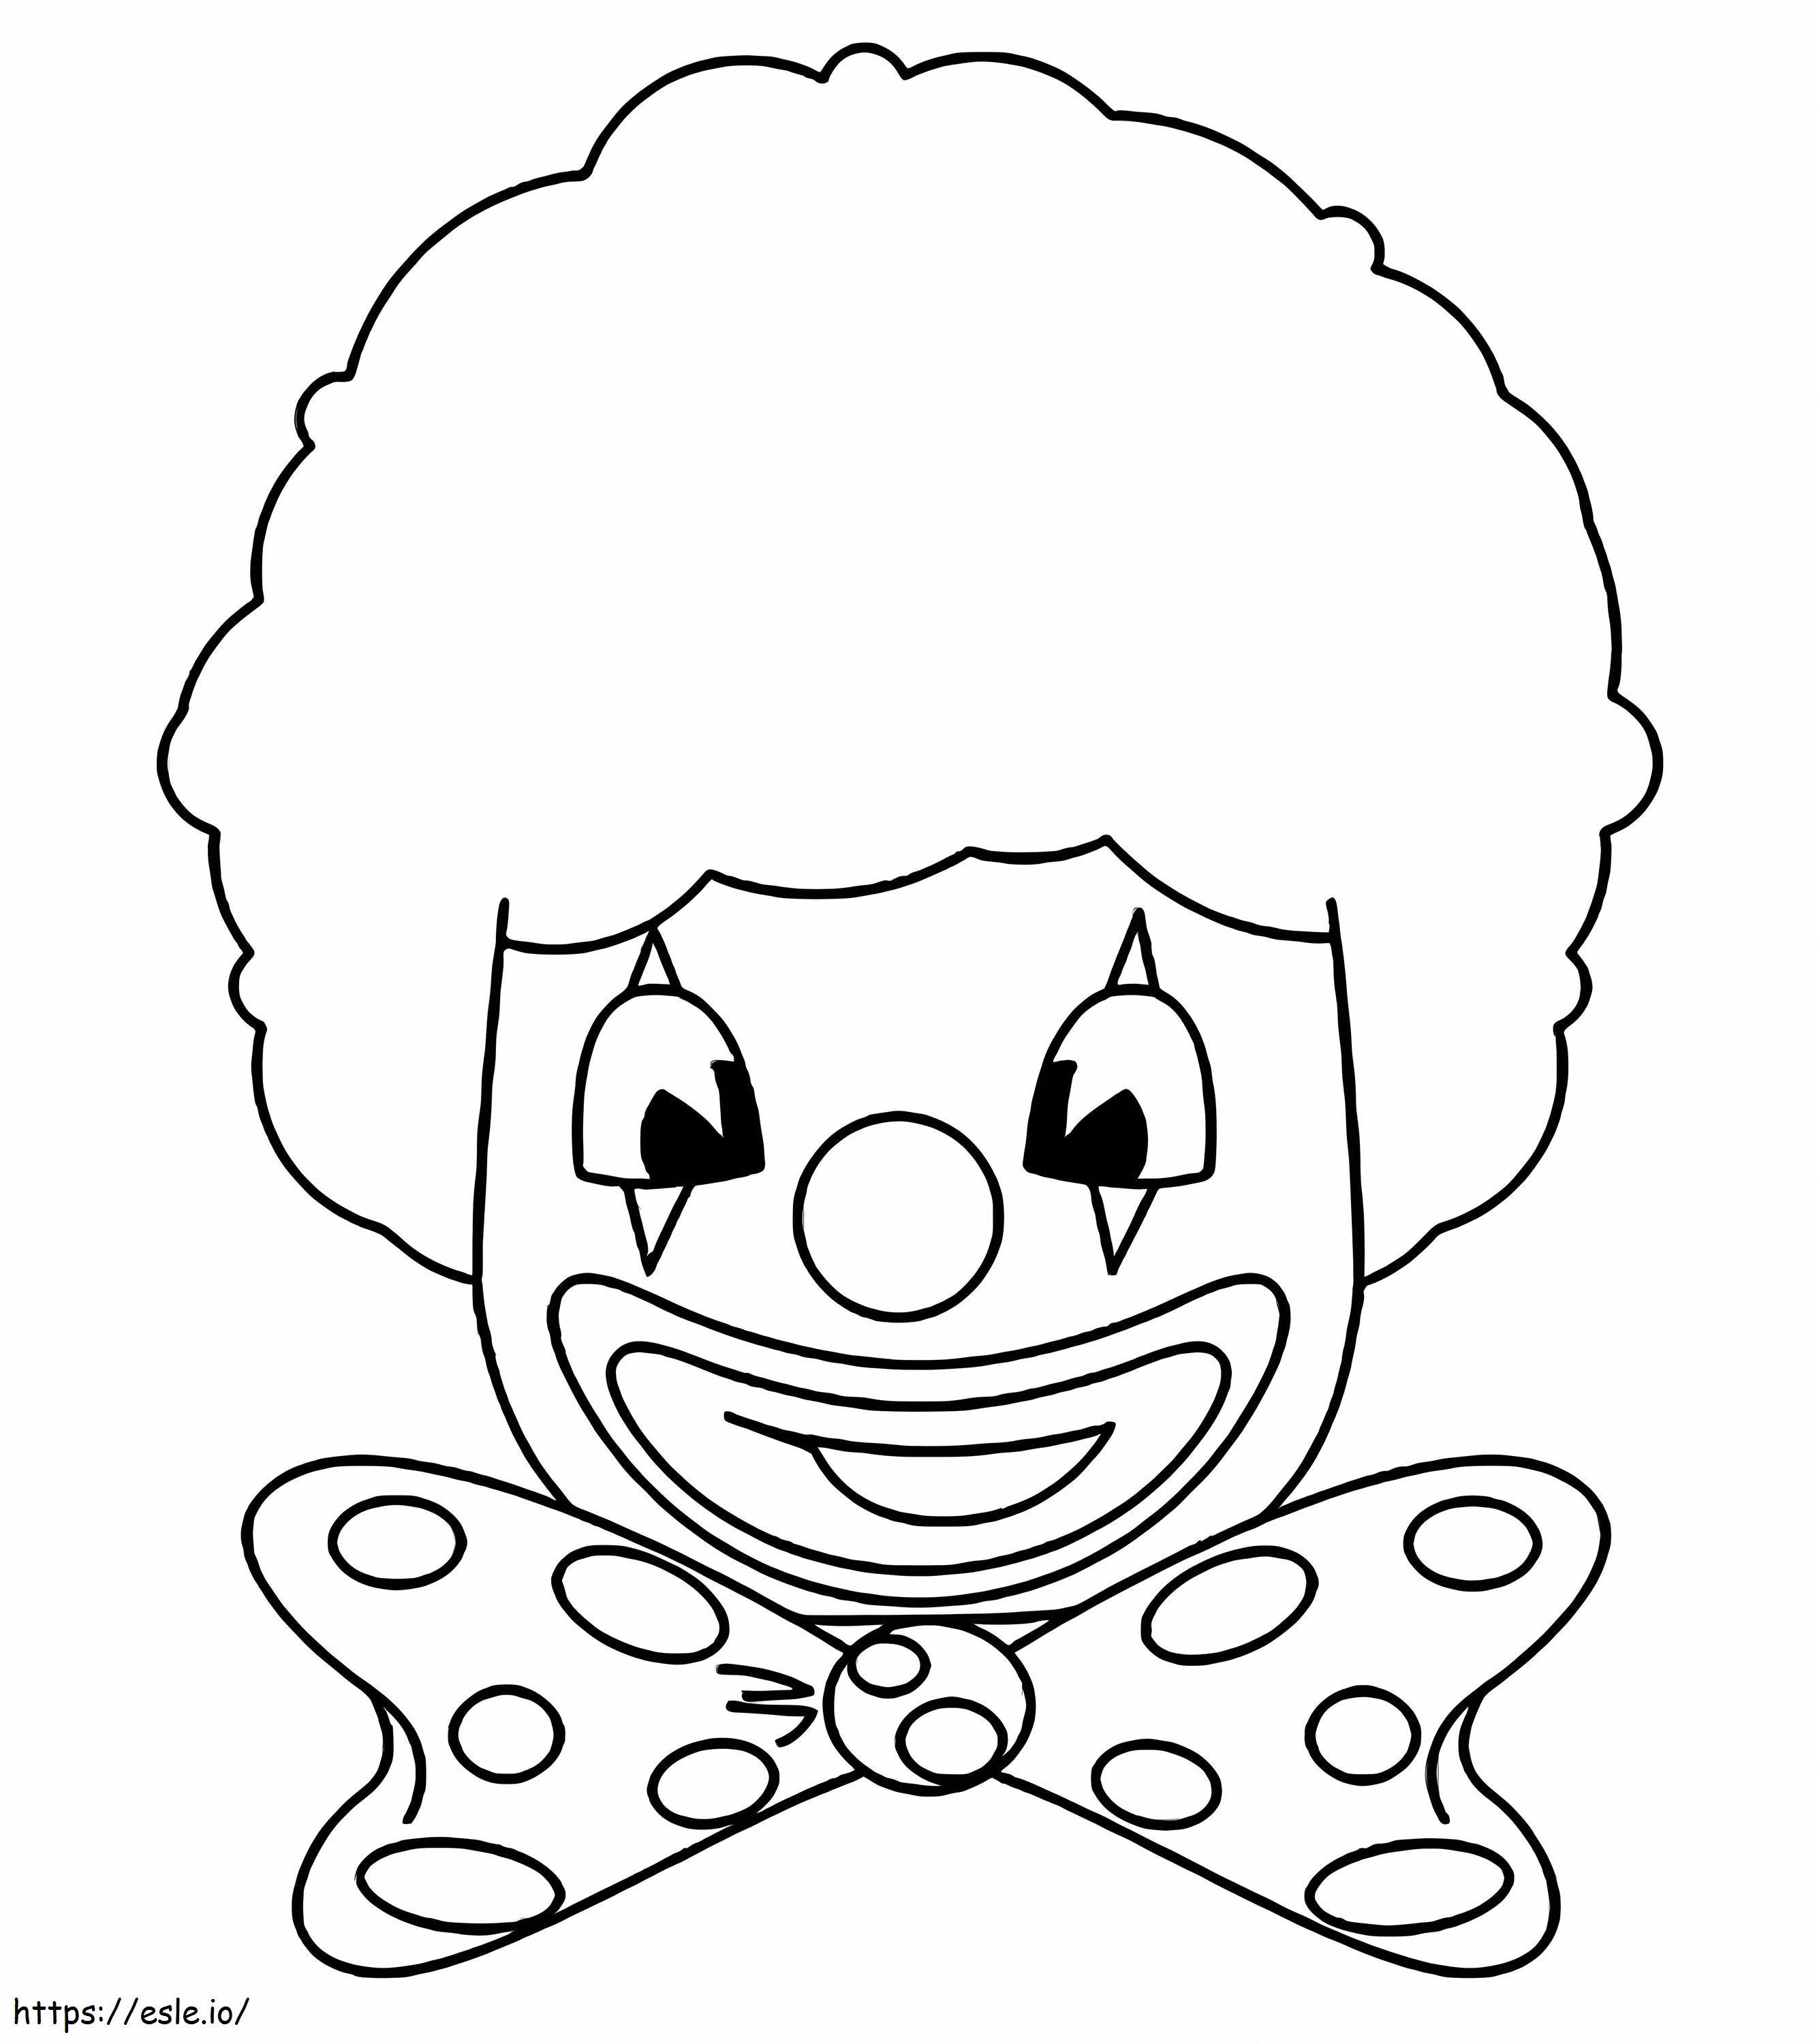 Funny Clown coloring page